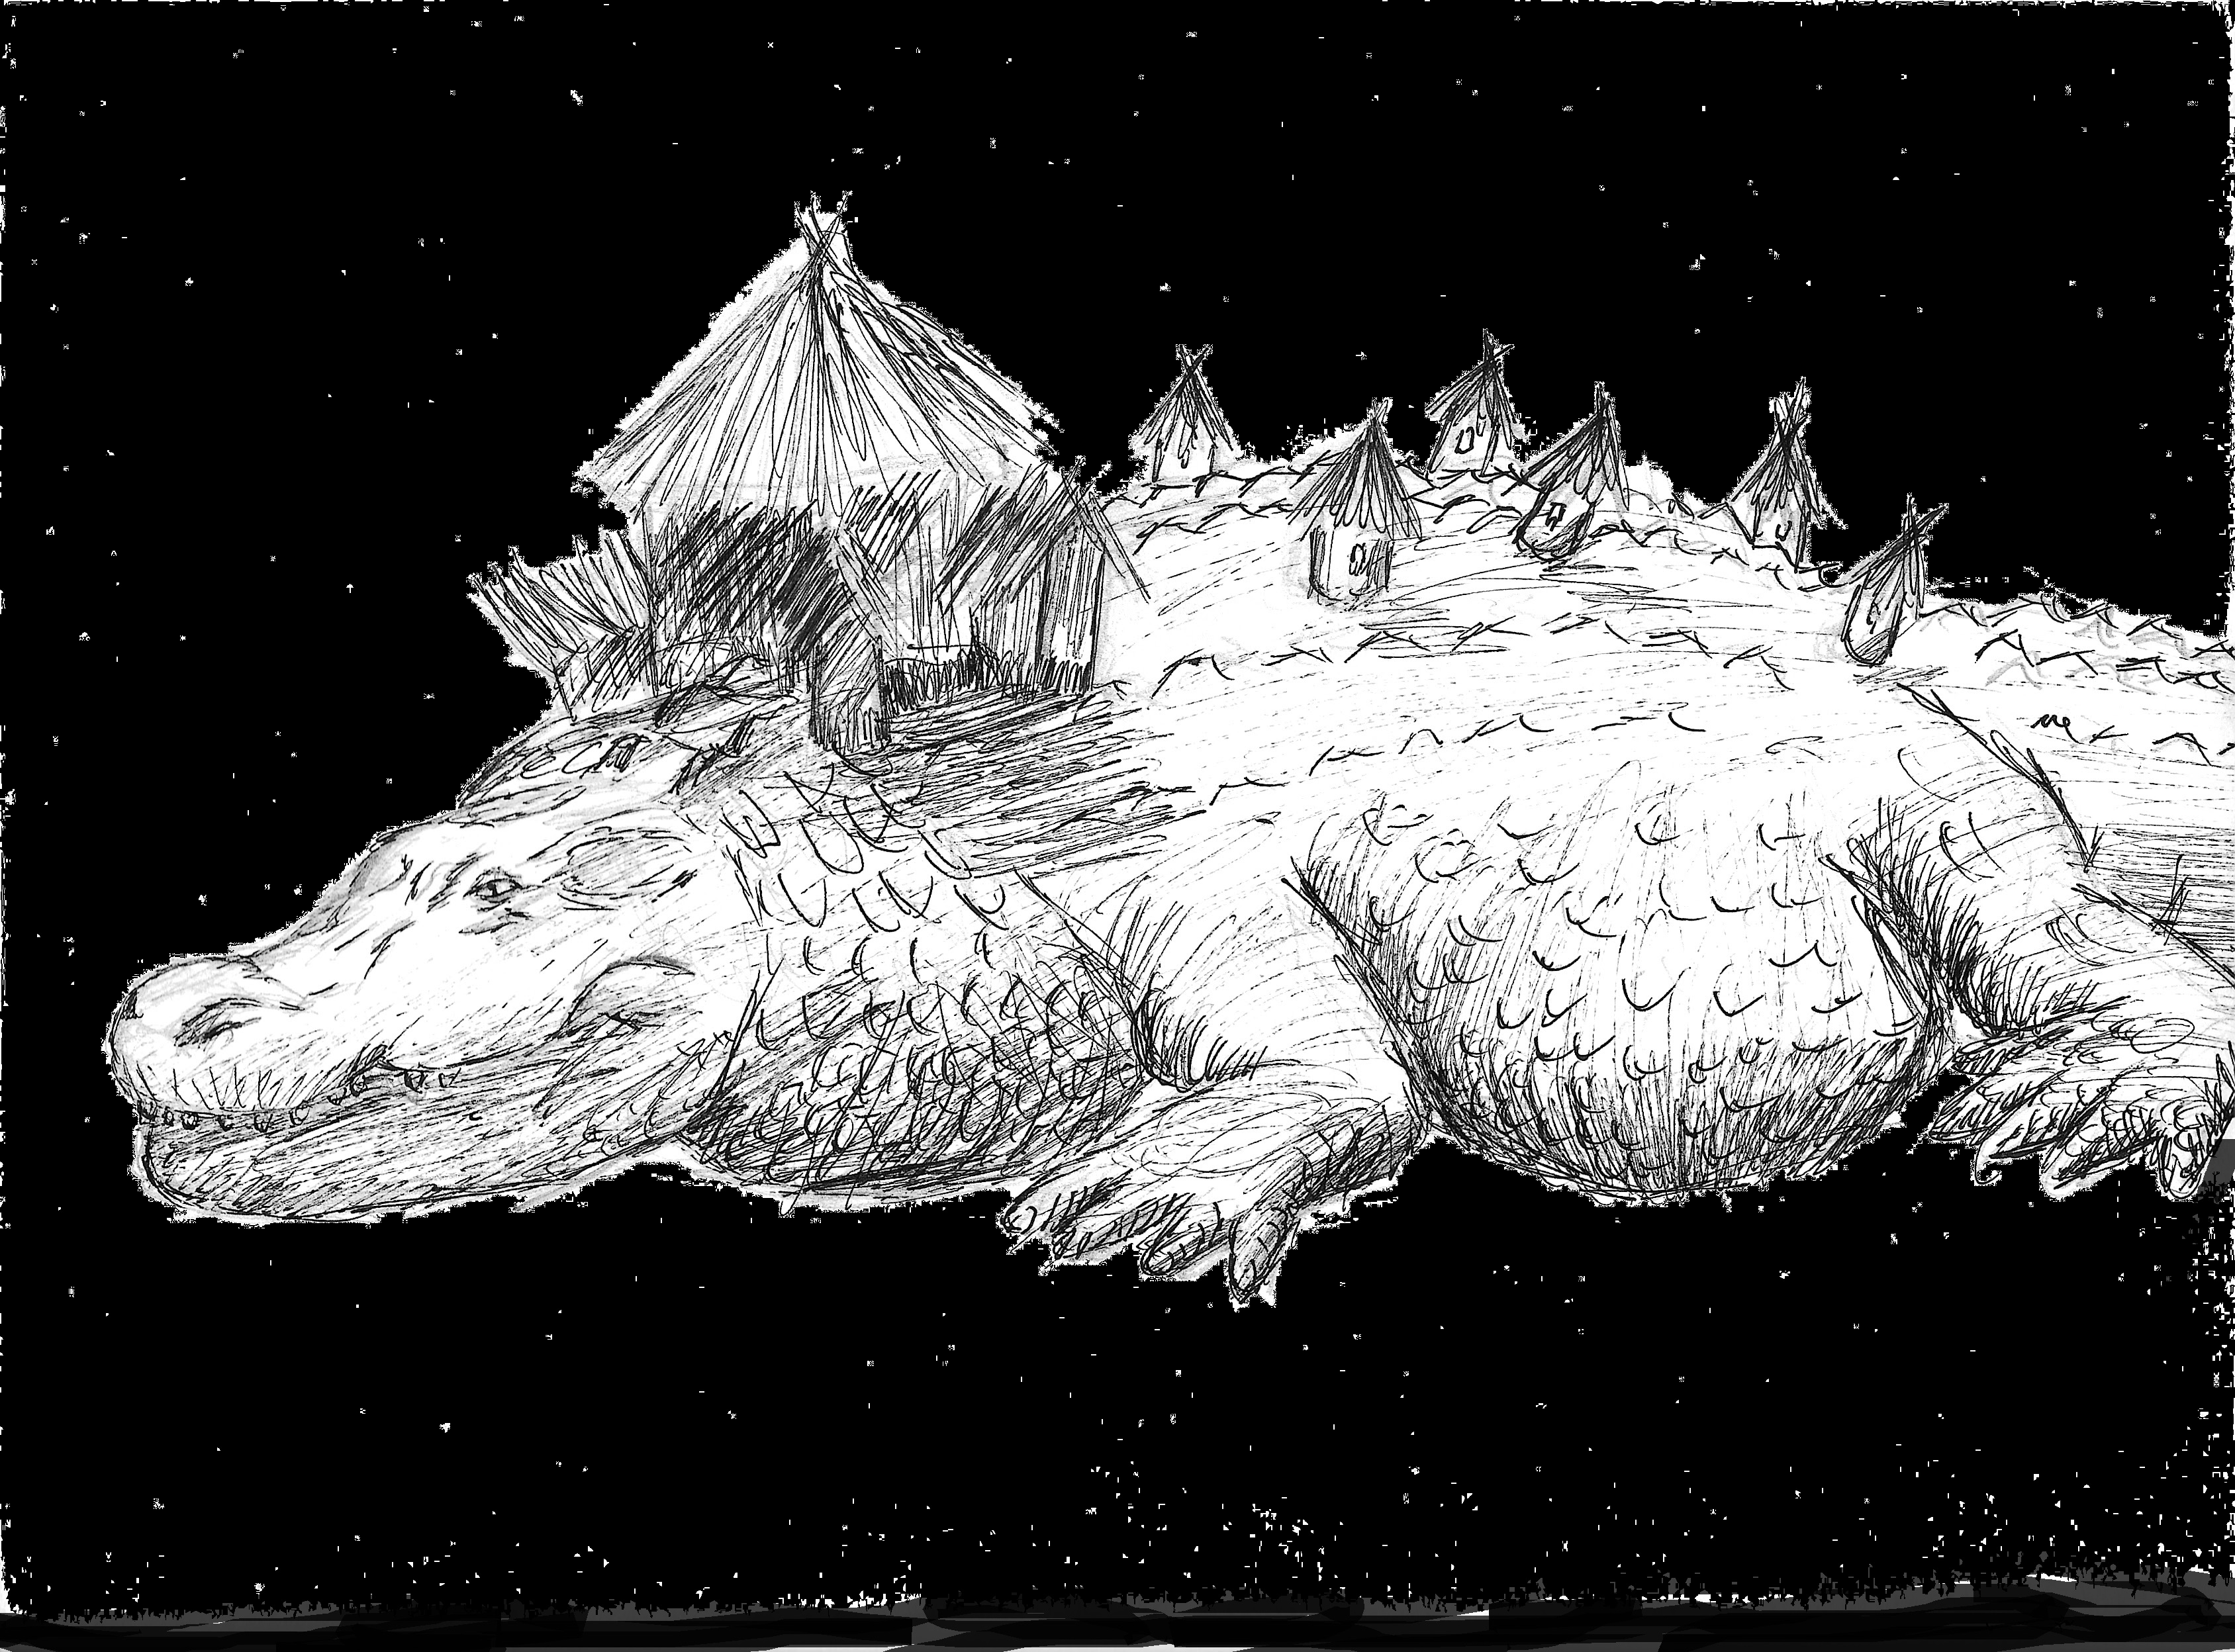 An alligator with a tavern and huts on its back.